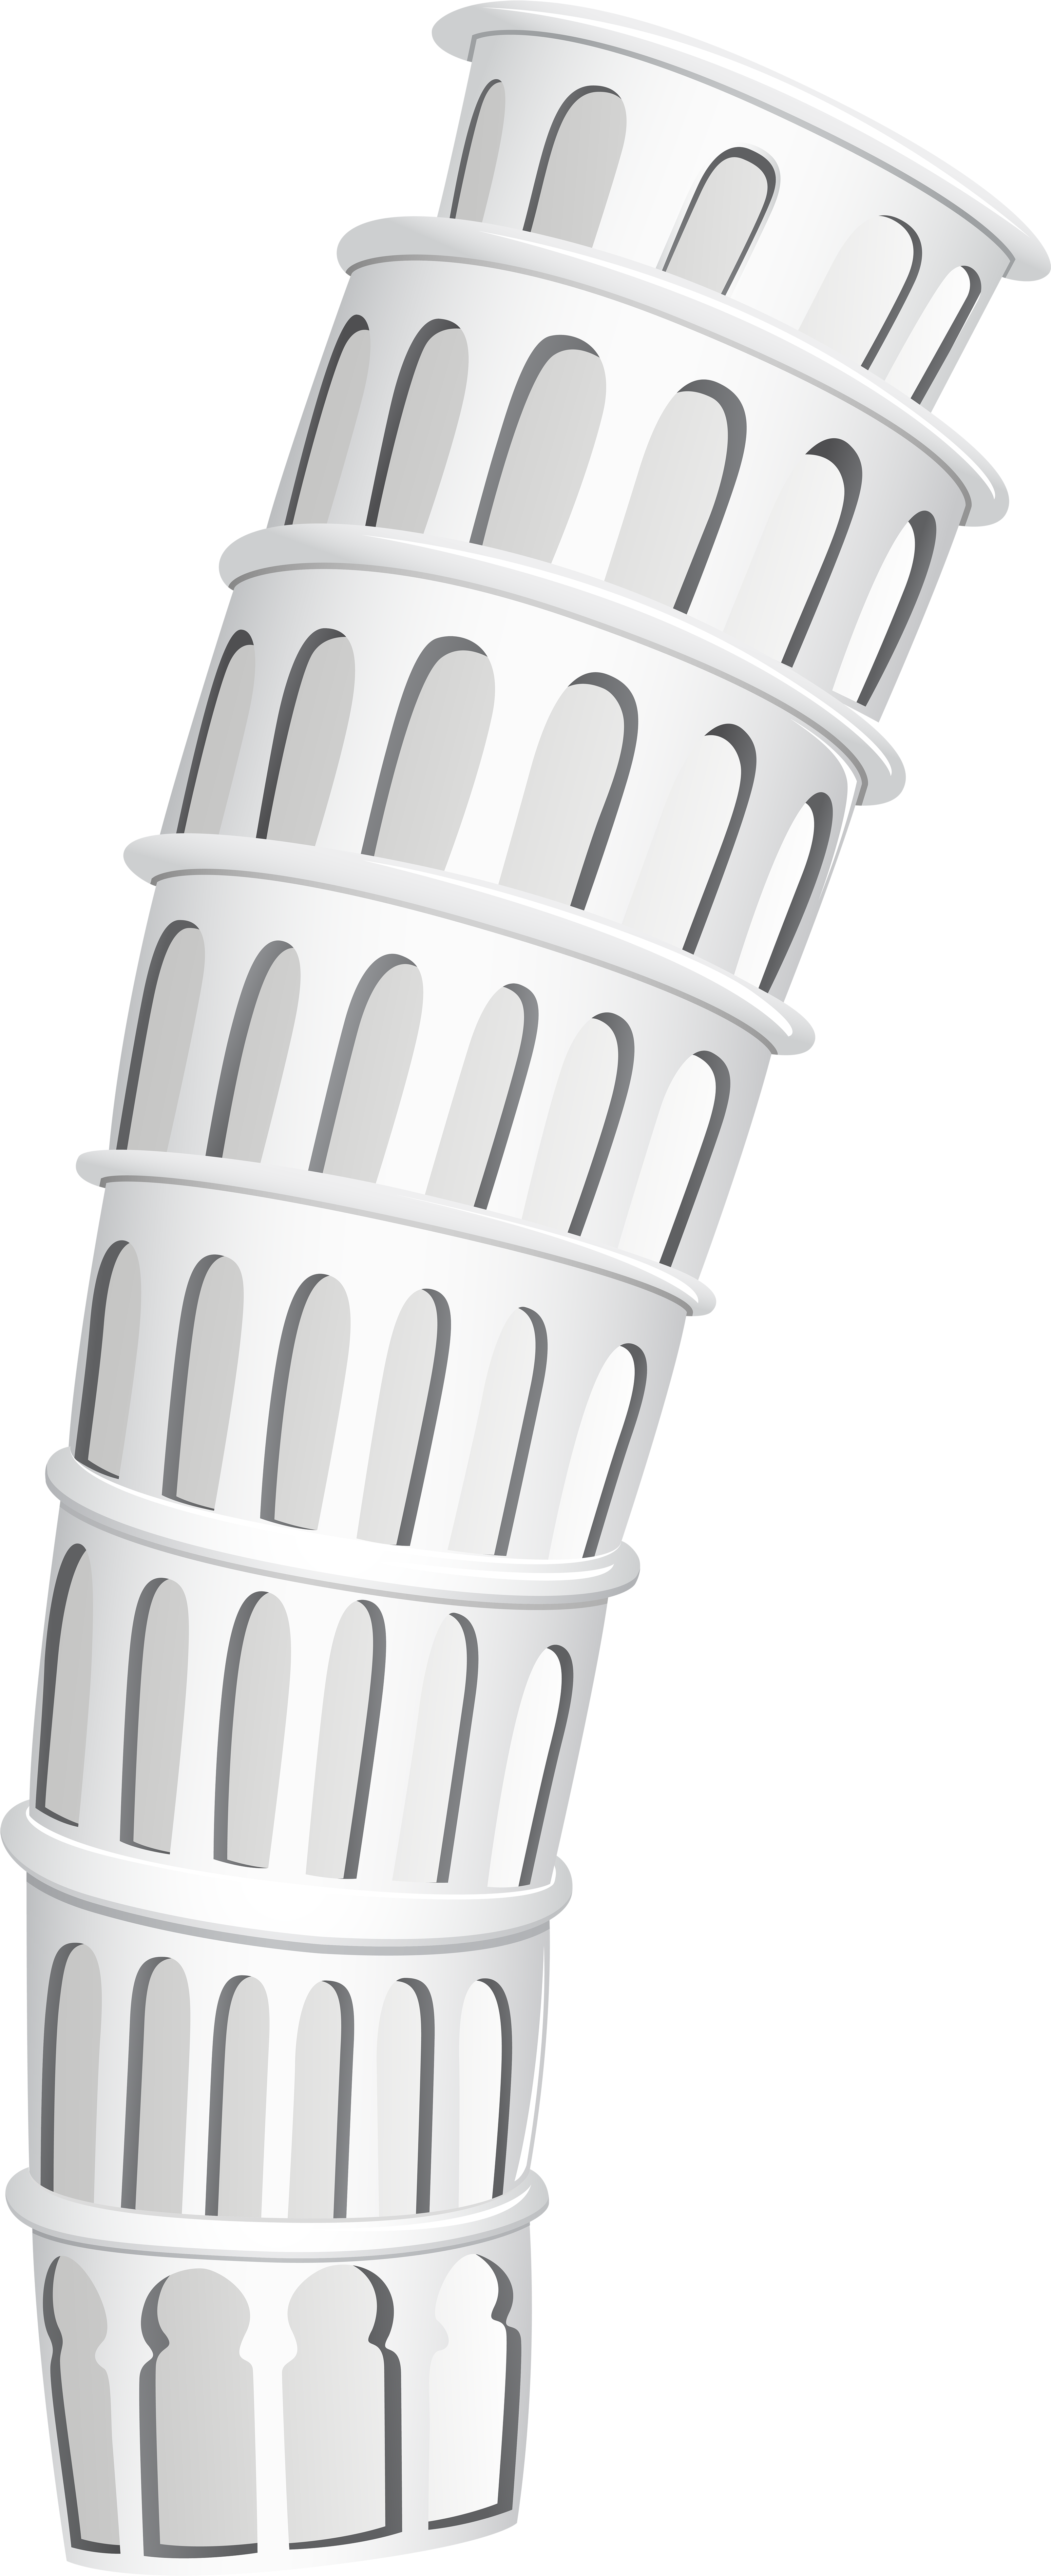 A White Tower With Columns